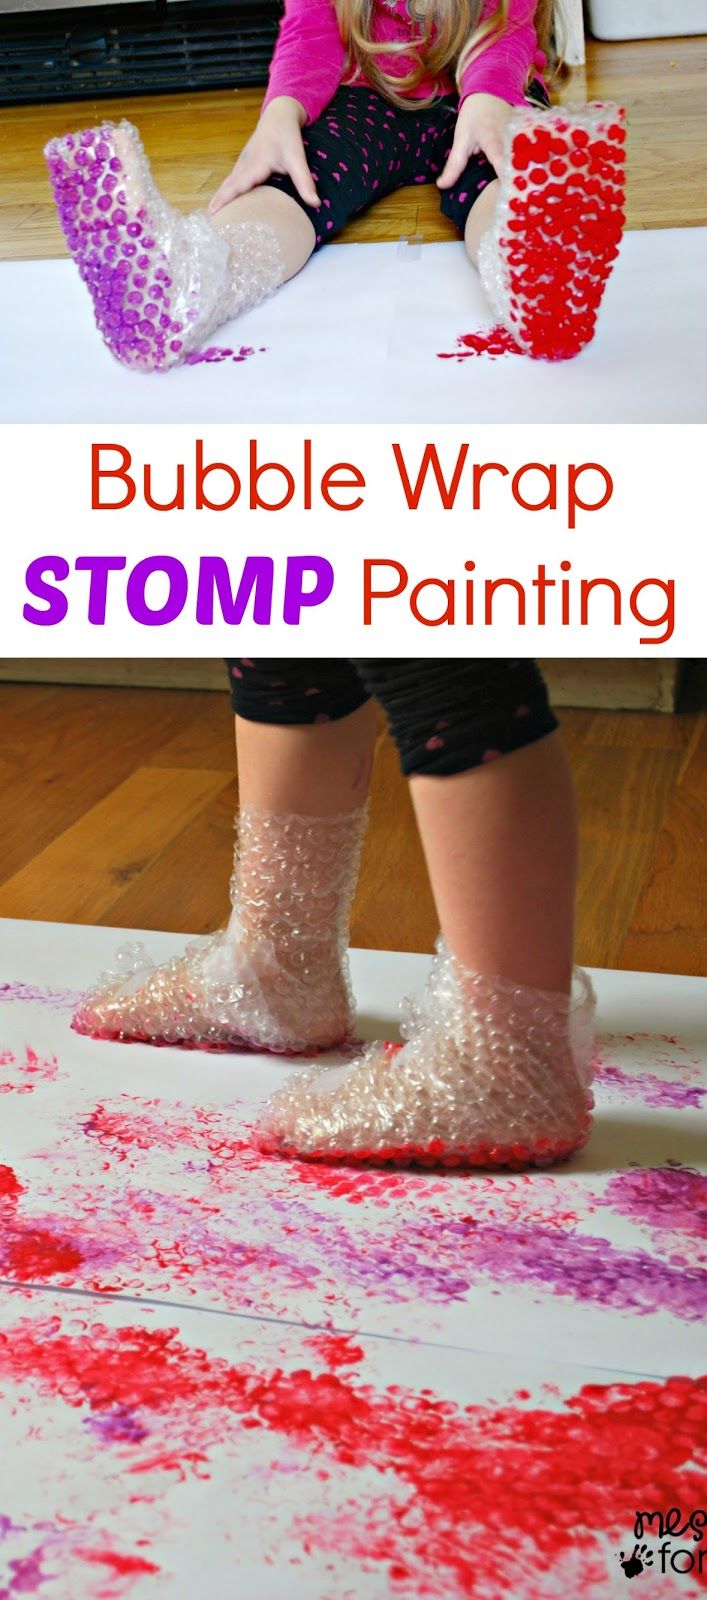 In my home, I have a closet of kids art and activity supplies, and when I am looking for ideas, I sometimes just go and look inside and see what inspires me. Today, I noticed some easel paper and bubble wrap. We have had lots of fun with bubble wrap in the past, creating Bubble Wrap Prints and Painting with Rolling Pins and Bubble Wrap. I decided to pair up bubble wrap and paint again, but this time I wanted it to be more of a gross motor experience. And so, Bubble Wrap Stomp Painting was born. Ideas, Toddlers, Diy, Bebe, Kid, Aba, Kinder, School, Toddler Art